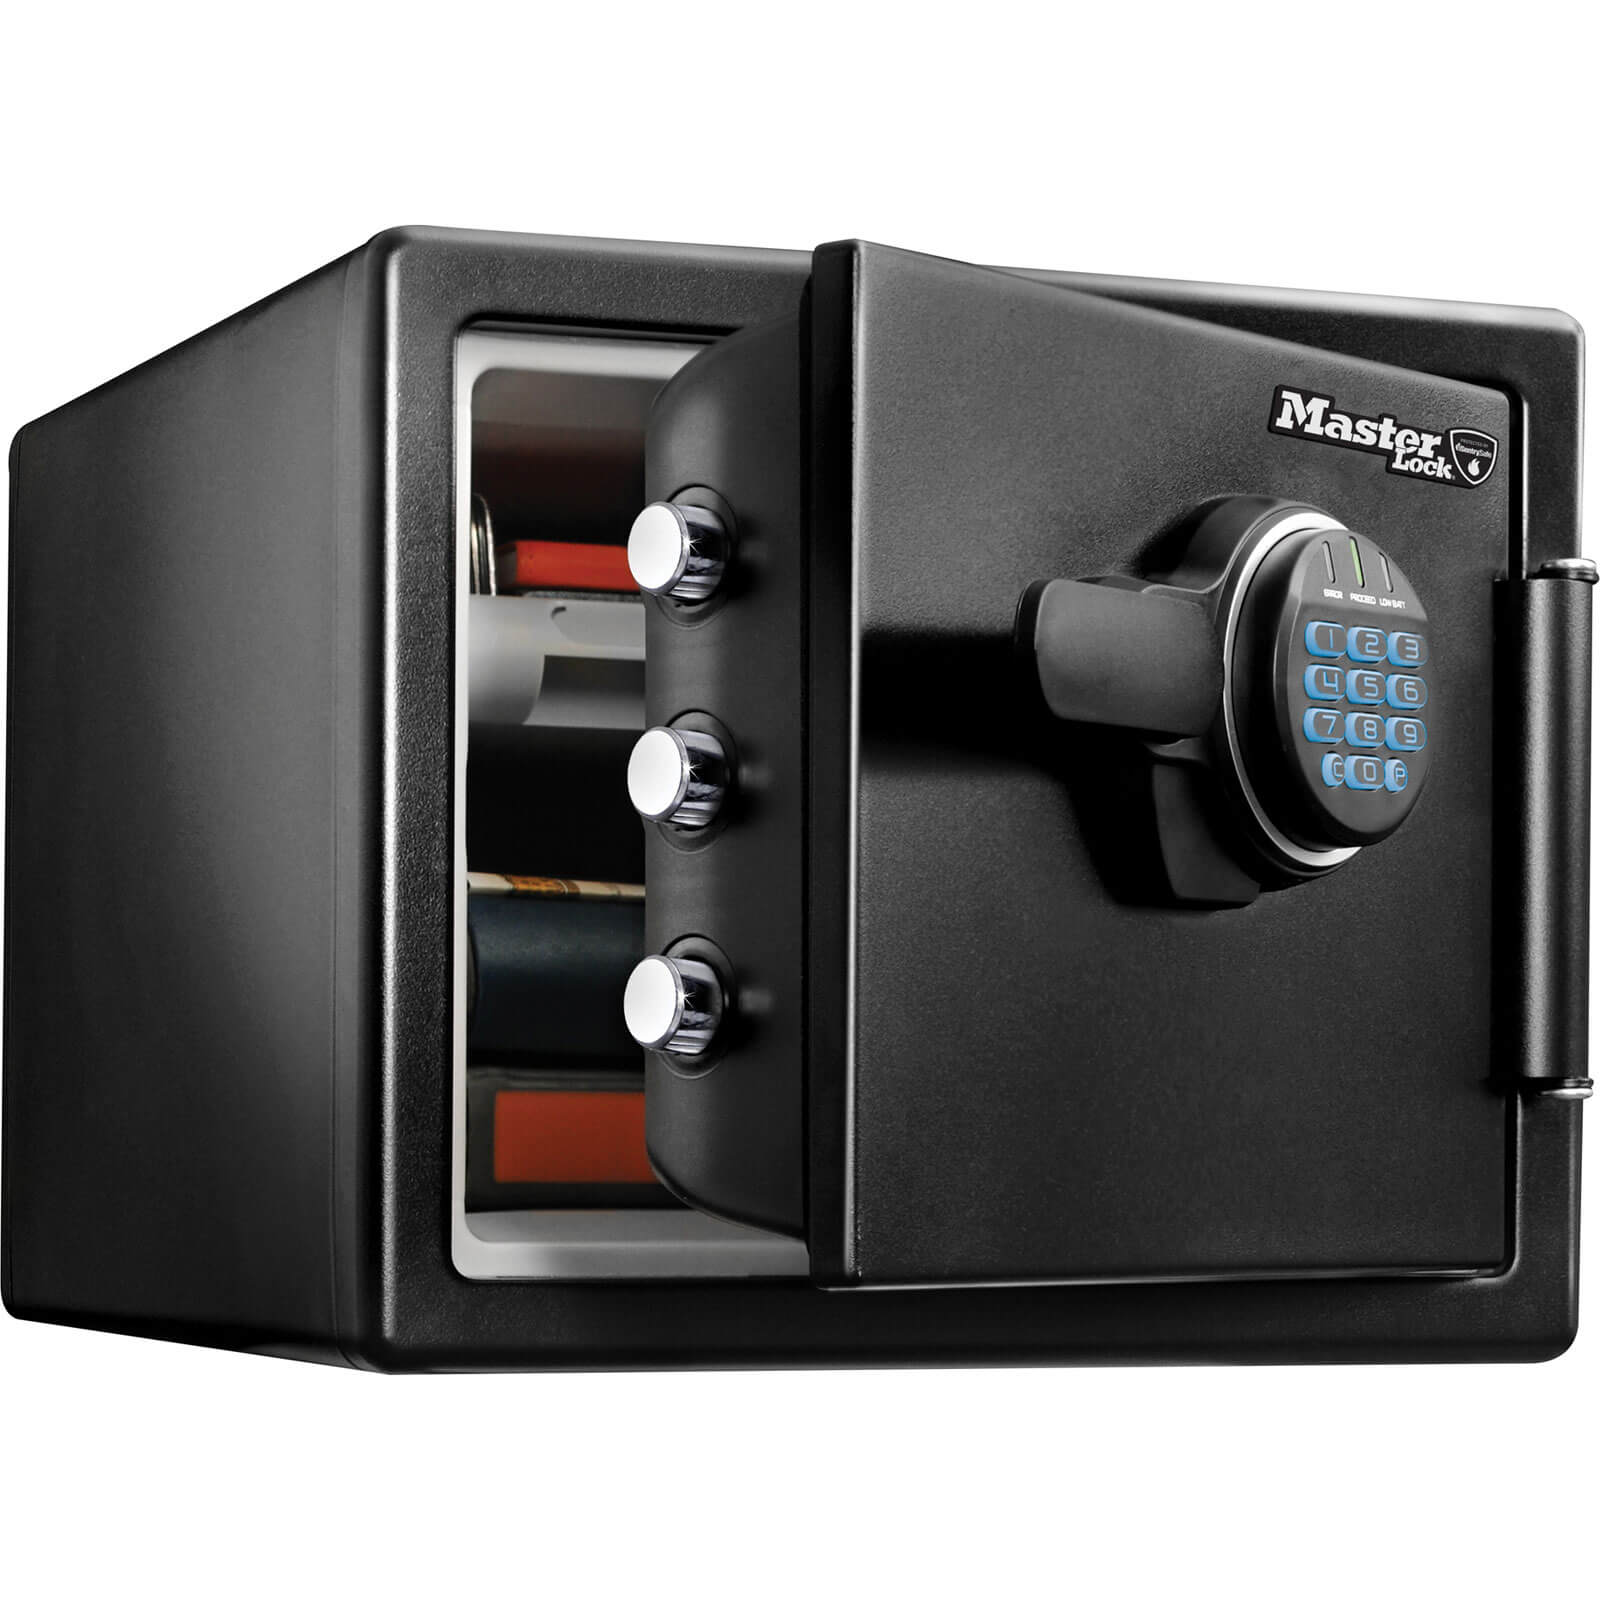 Image of Master Lock Large Digital Fire and Water Safe